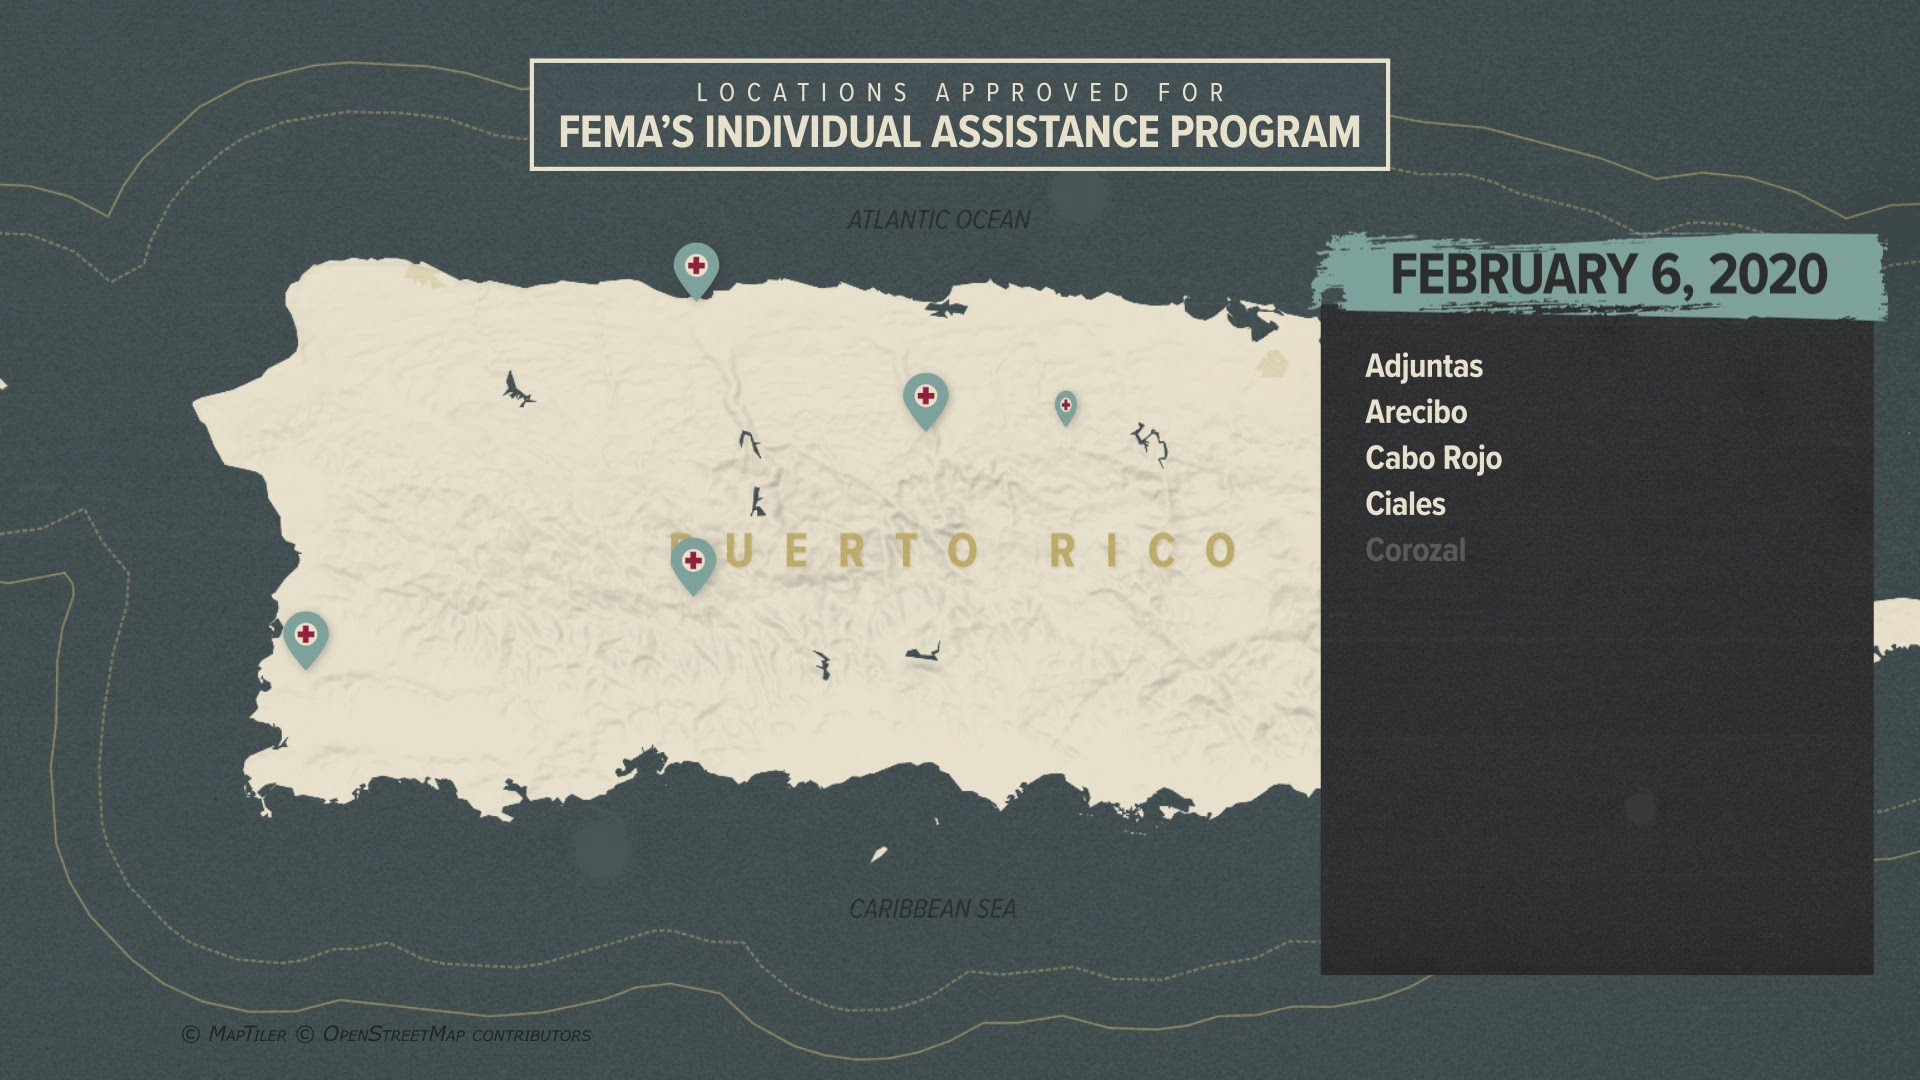 A map of the locations of all approved FEMA programs.